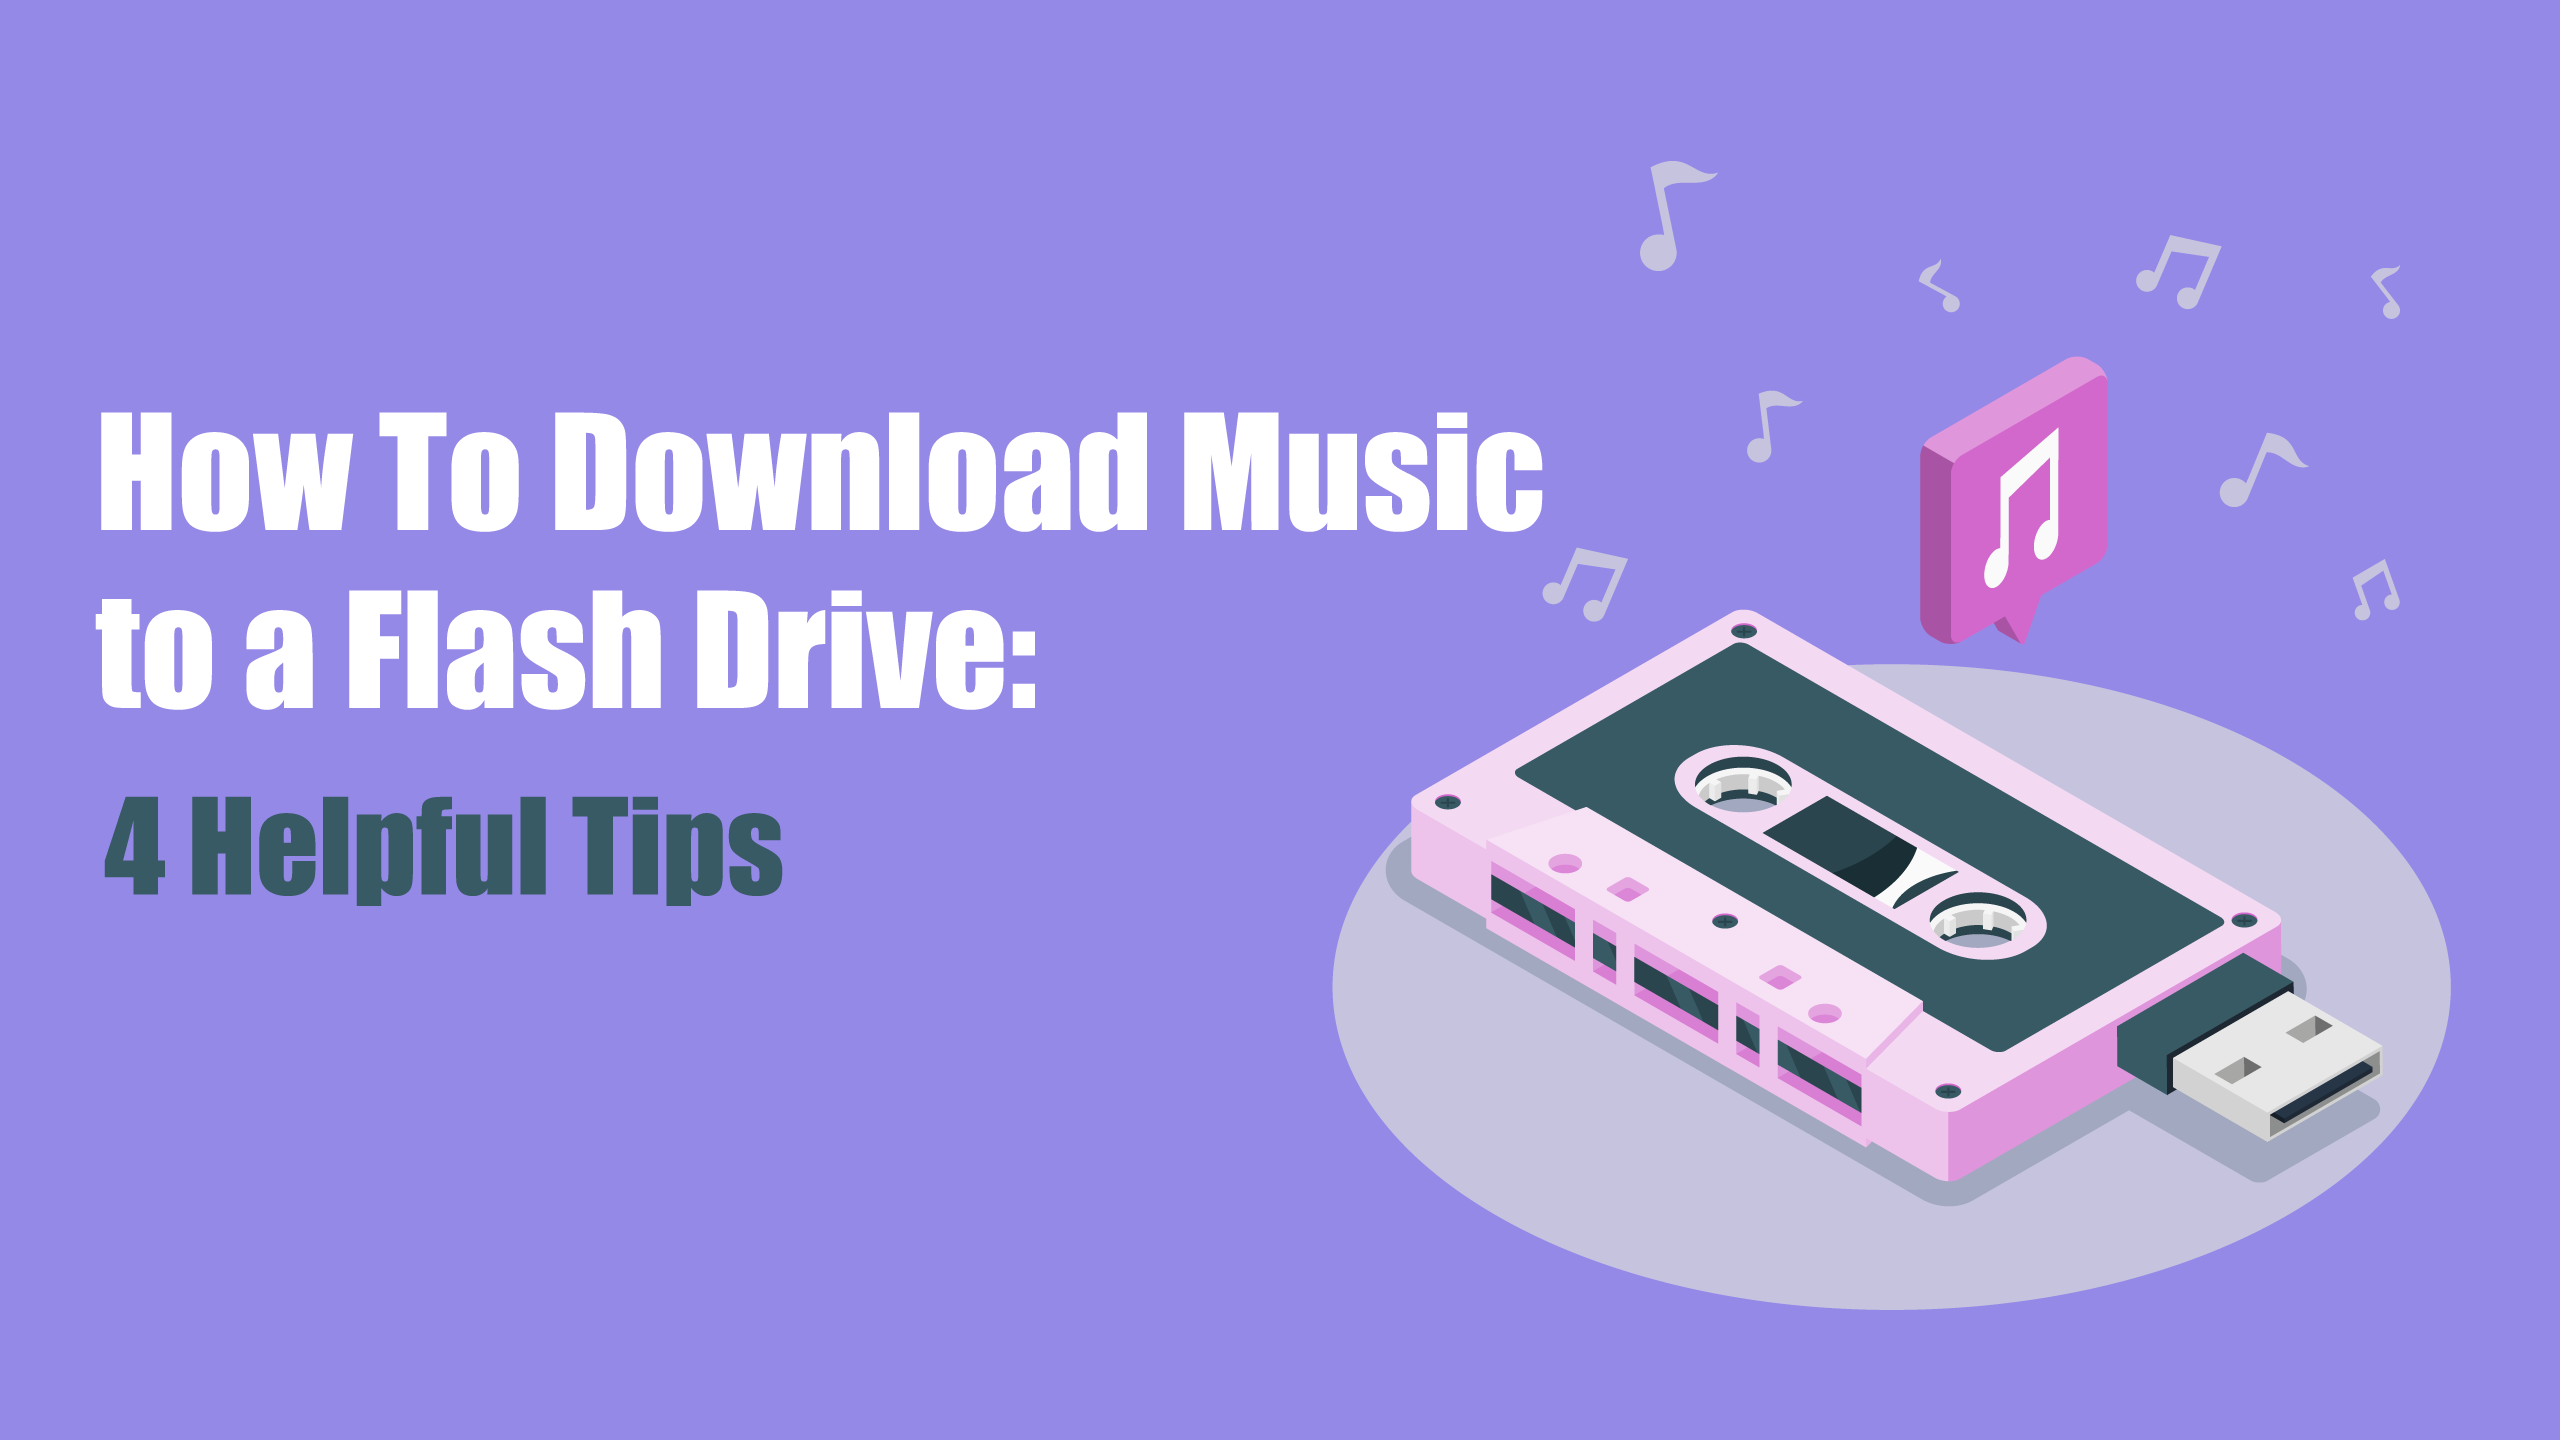 How To Download Music to a Flash Drive